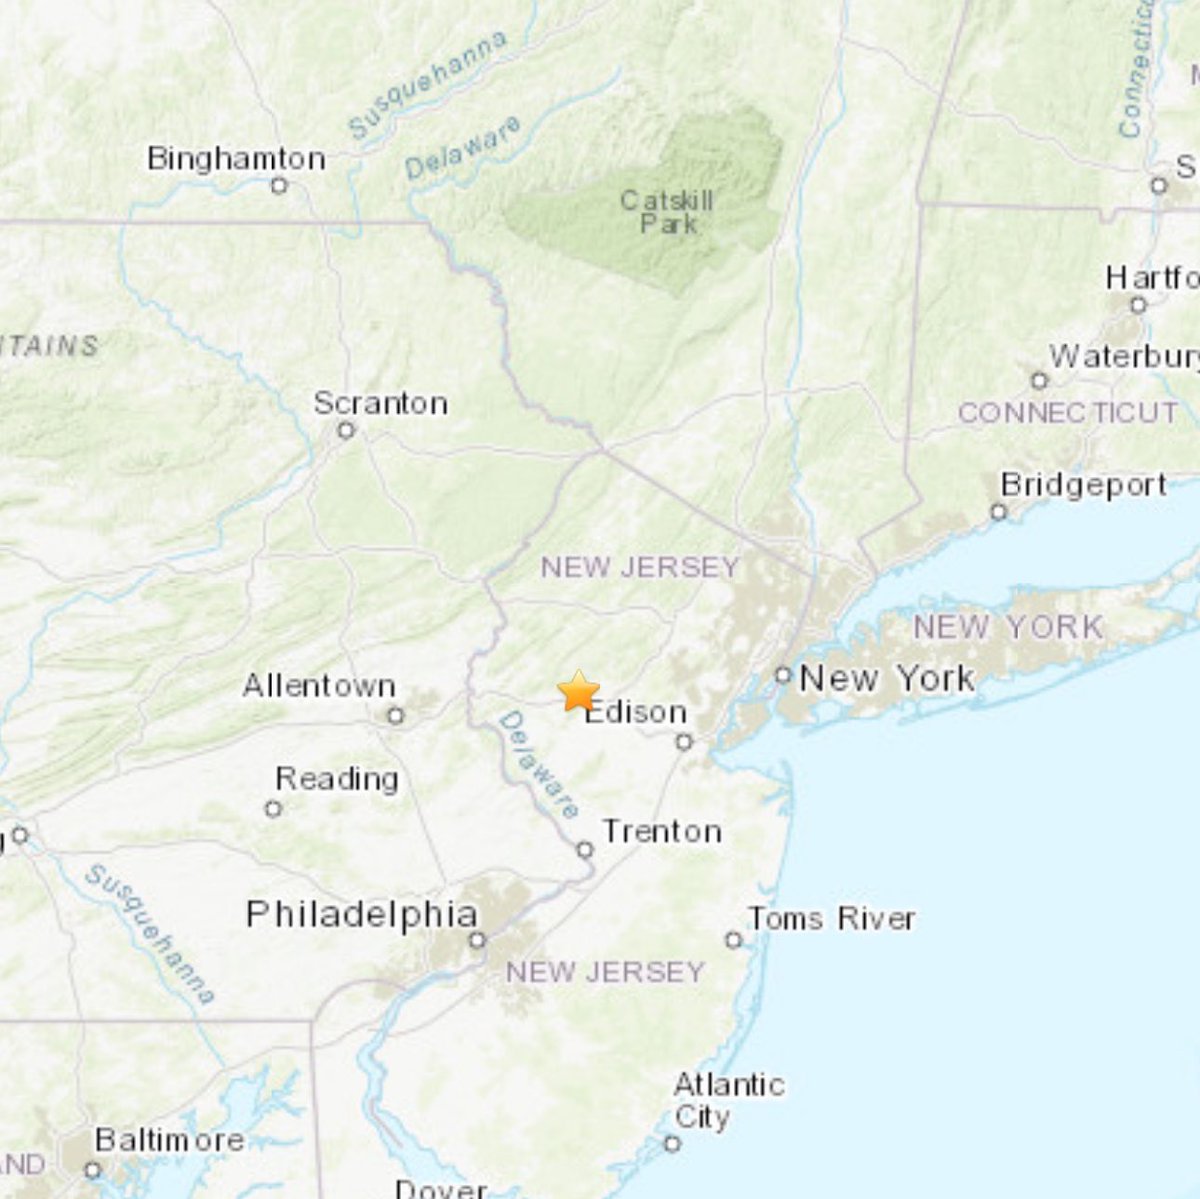 NEW: Magnitude 4.8 #earthquake hit Lebanon, New Jersey. It was a very shallow quake, making it felt far and wide — from Maine to the Mid-Atlantic. #Philadelphia and #NYC felt it. Earthquake surface waves travel farther in the eastern U.S. due to crustal composition.